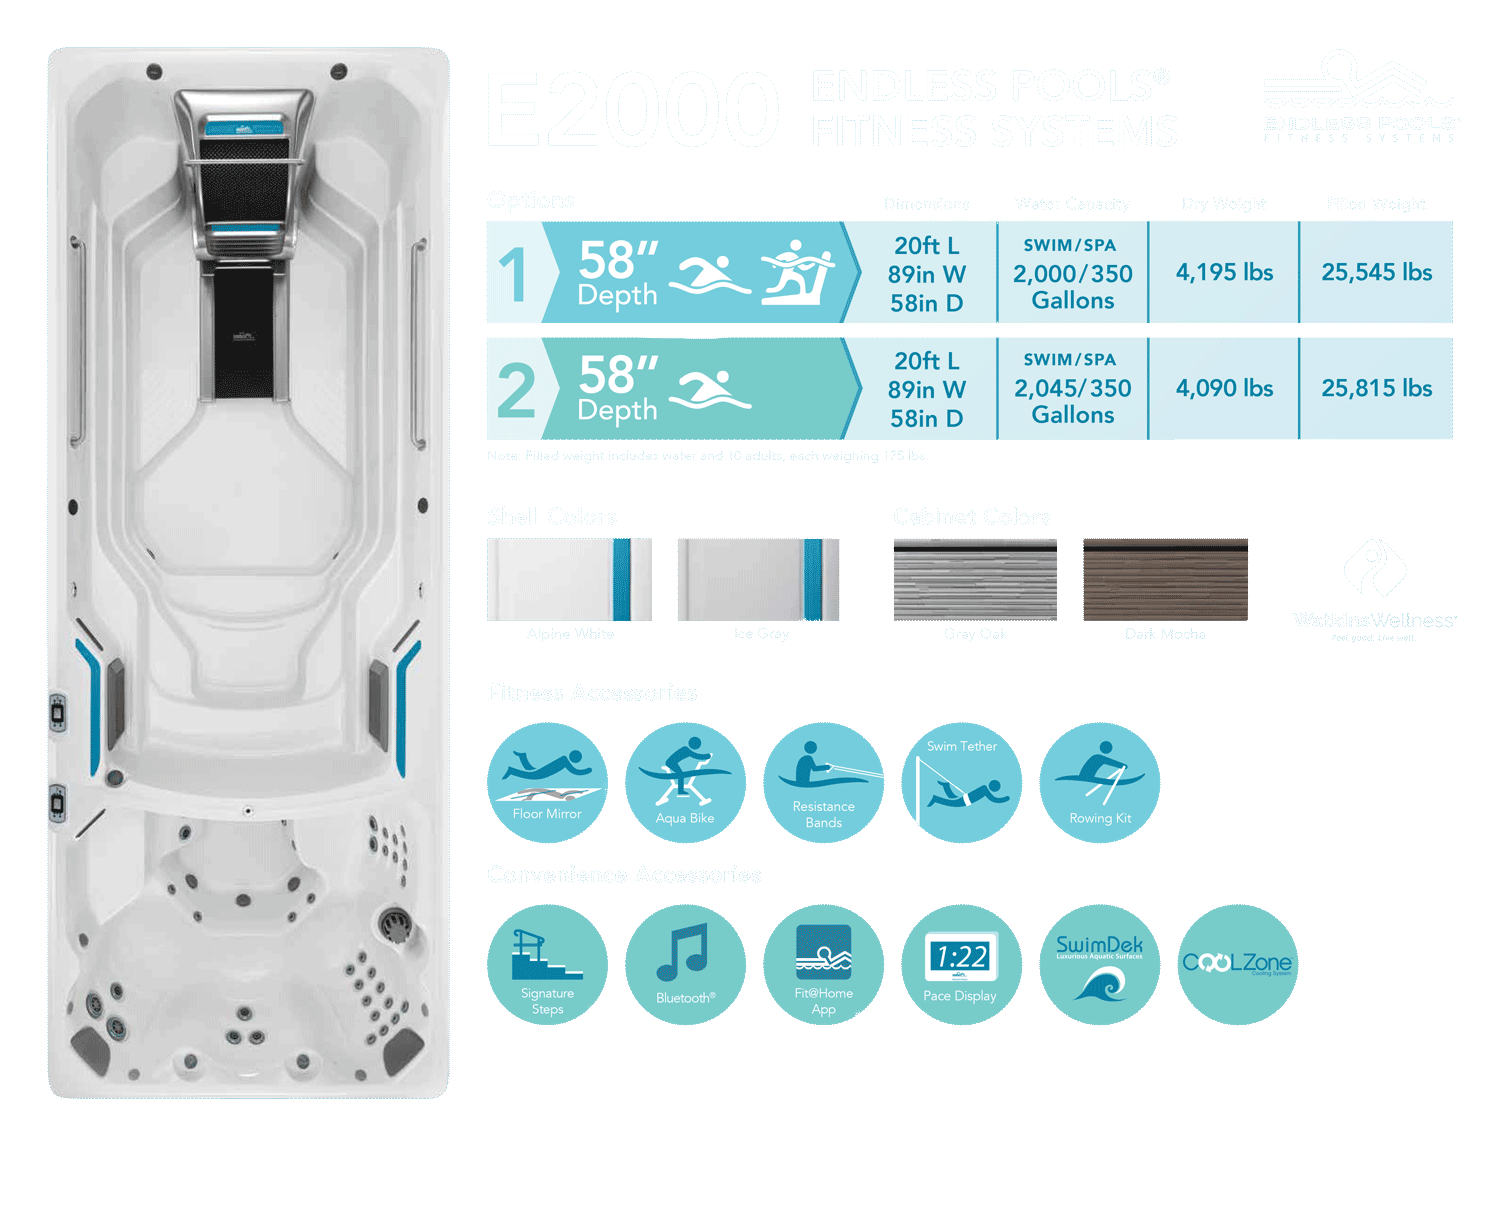 Chart displaying the features of the E2000 Endless spa